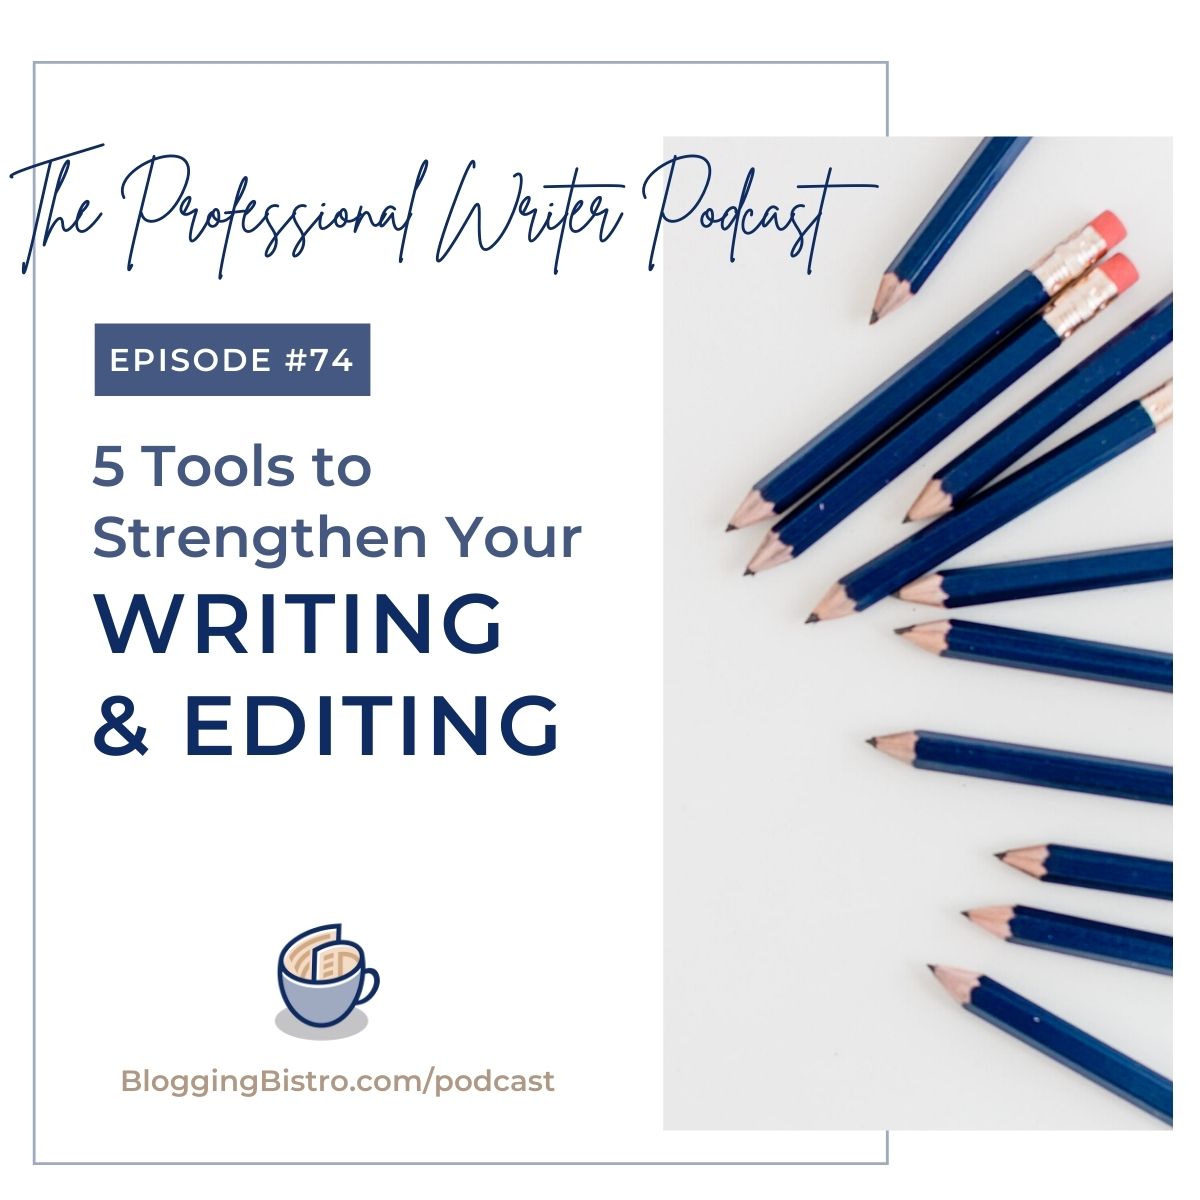 5 Tools to Strengthen Your Writing and Editing